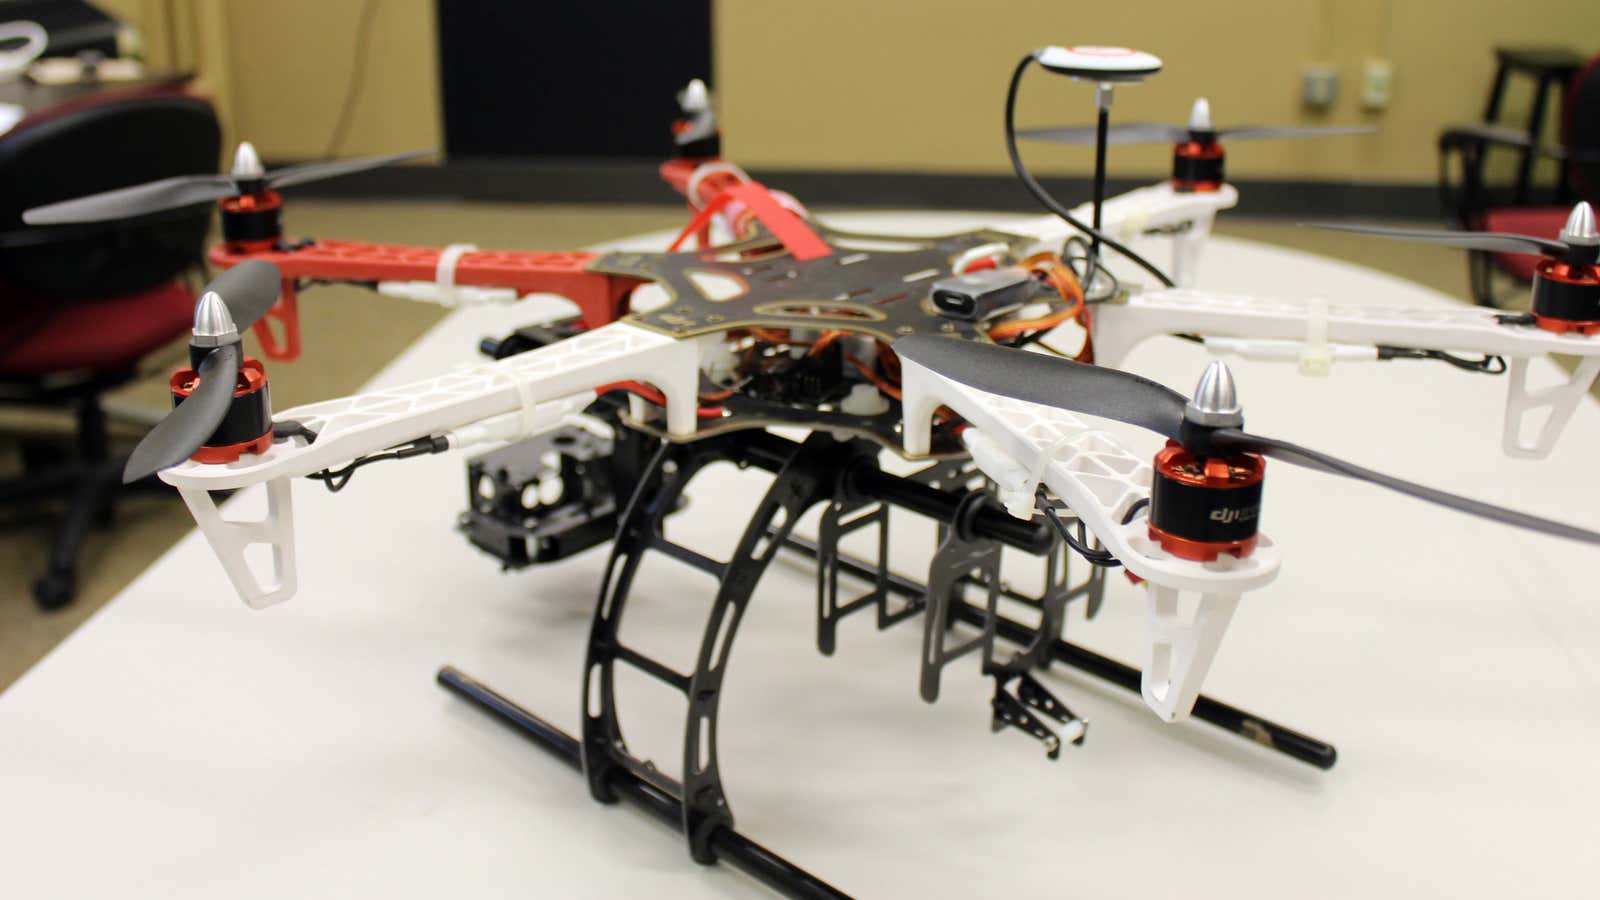 A journalism drone at The University of Missouri